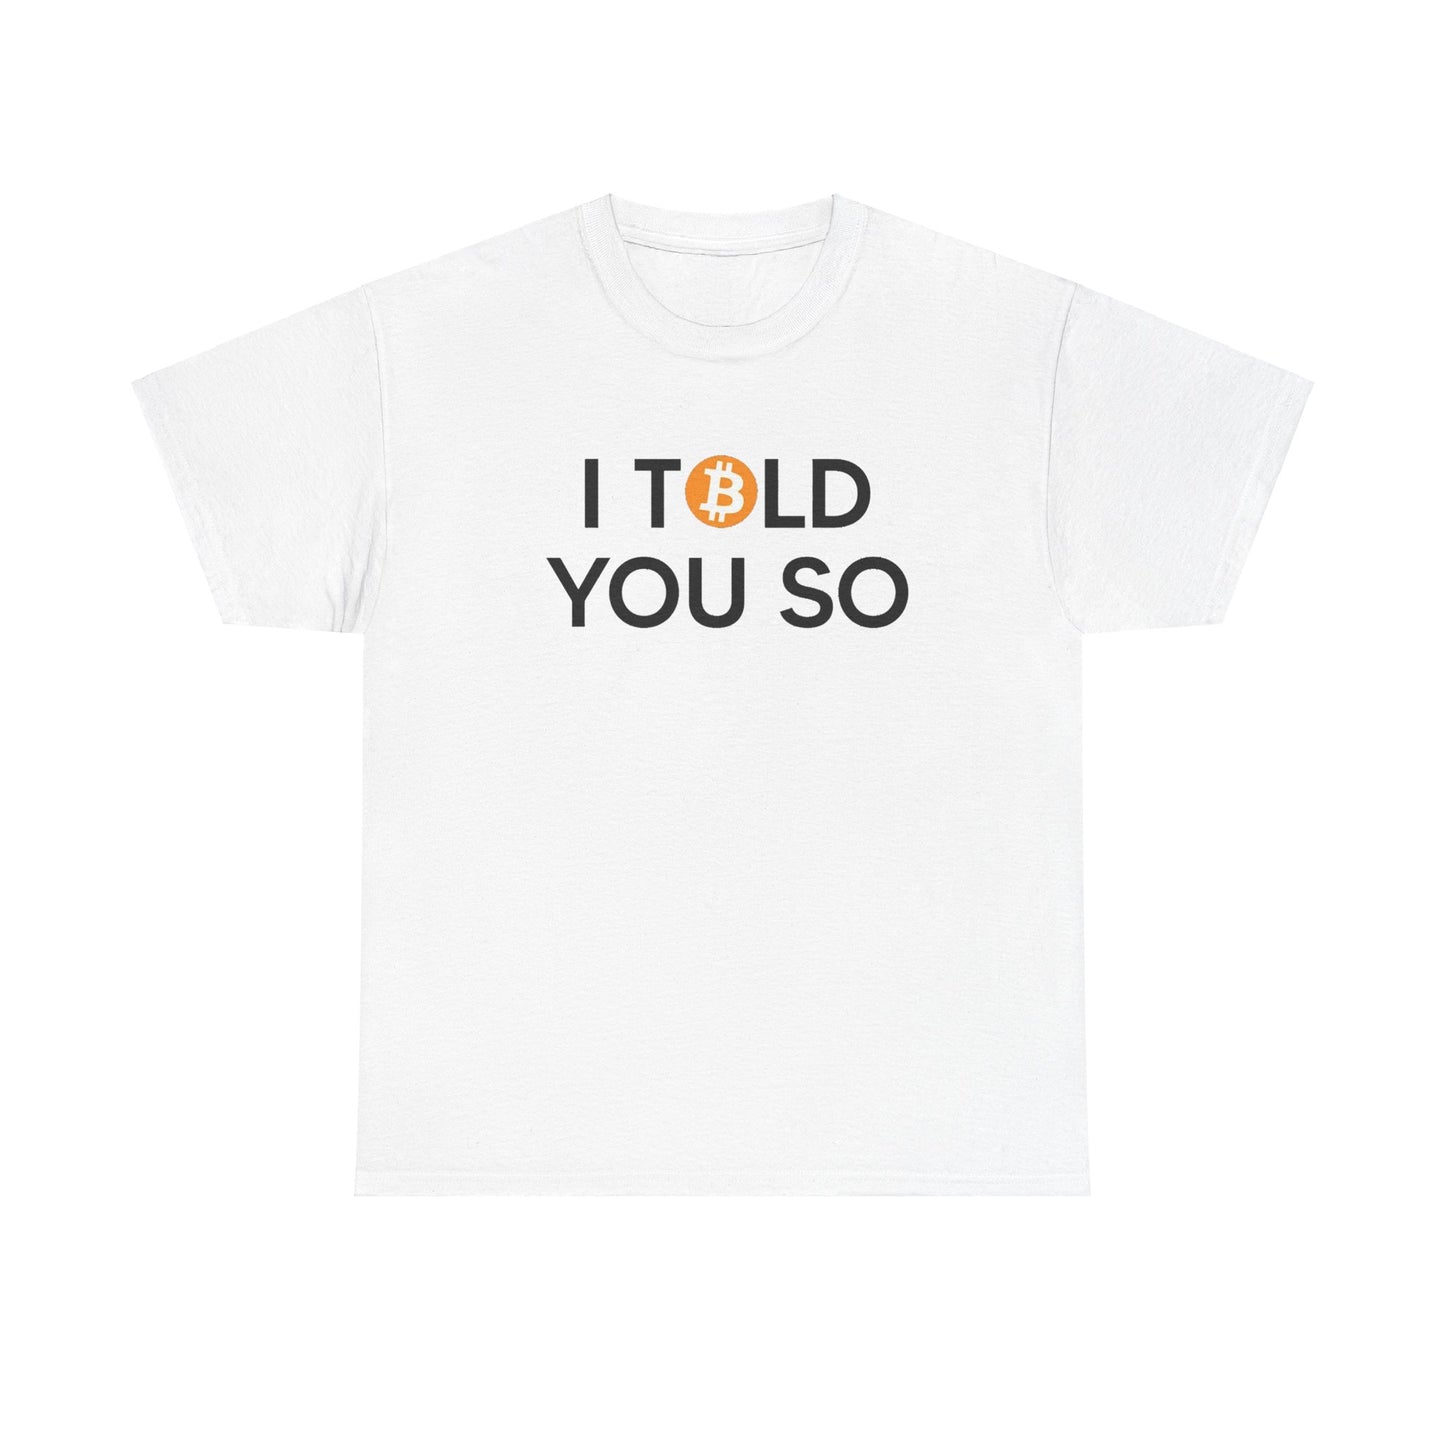 I TOLD YOU SO - T-Shirt